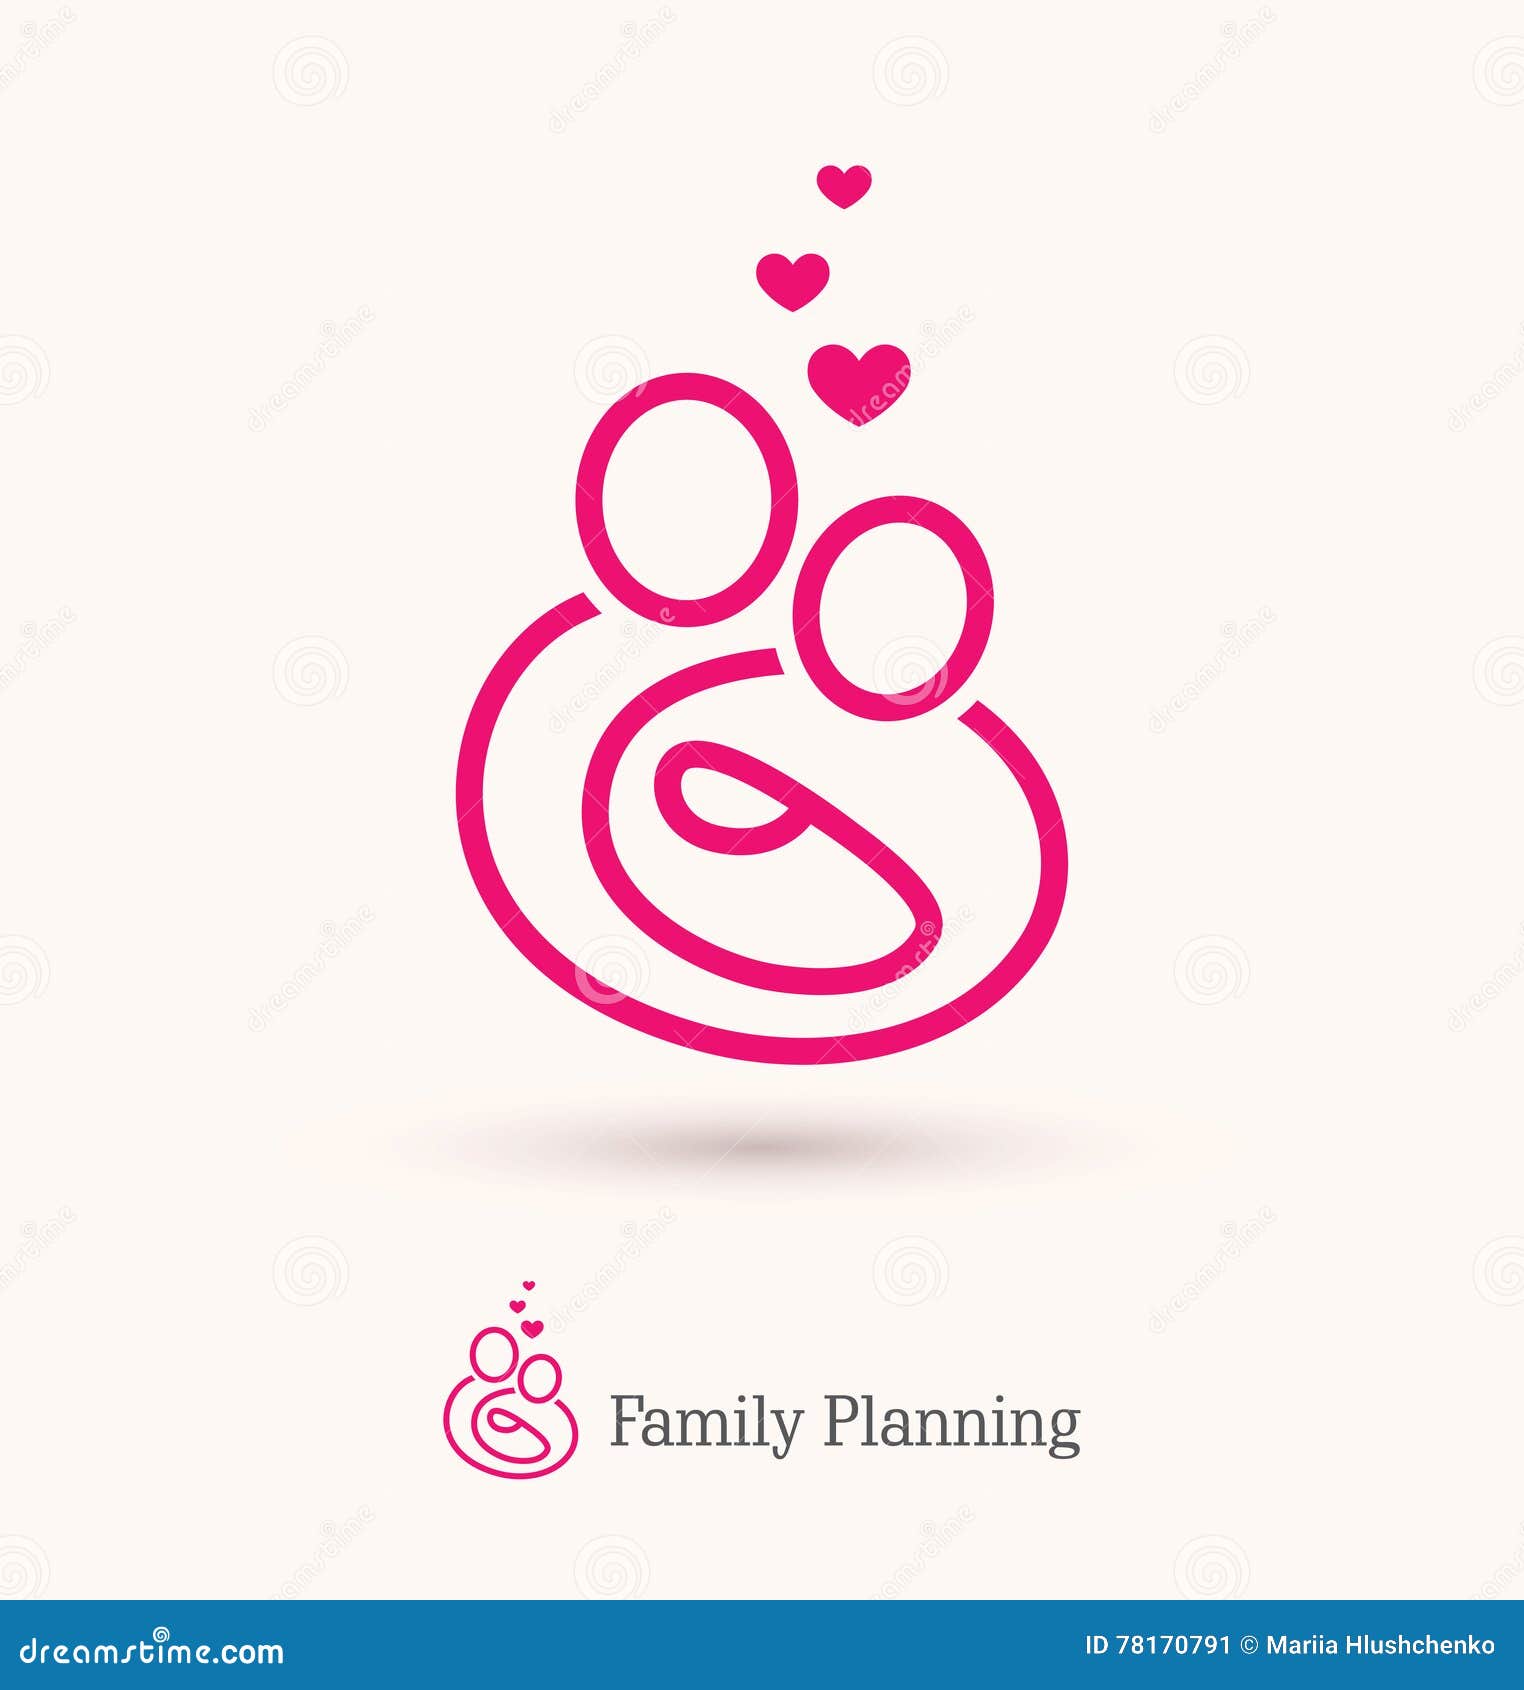 Download Logo Of Happy Family With A Baby Stock Vector - Illustration of symbol, outline: 78170791